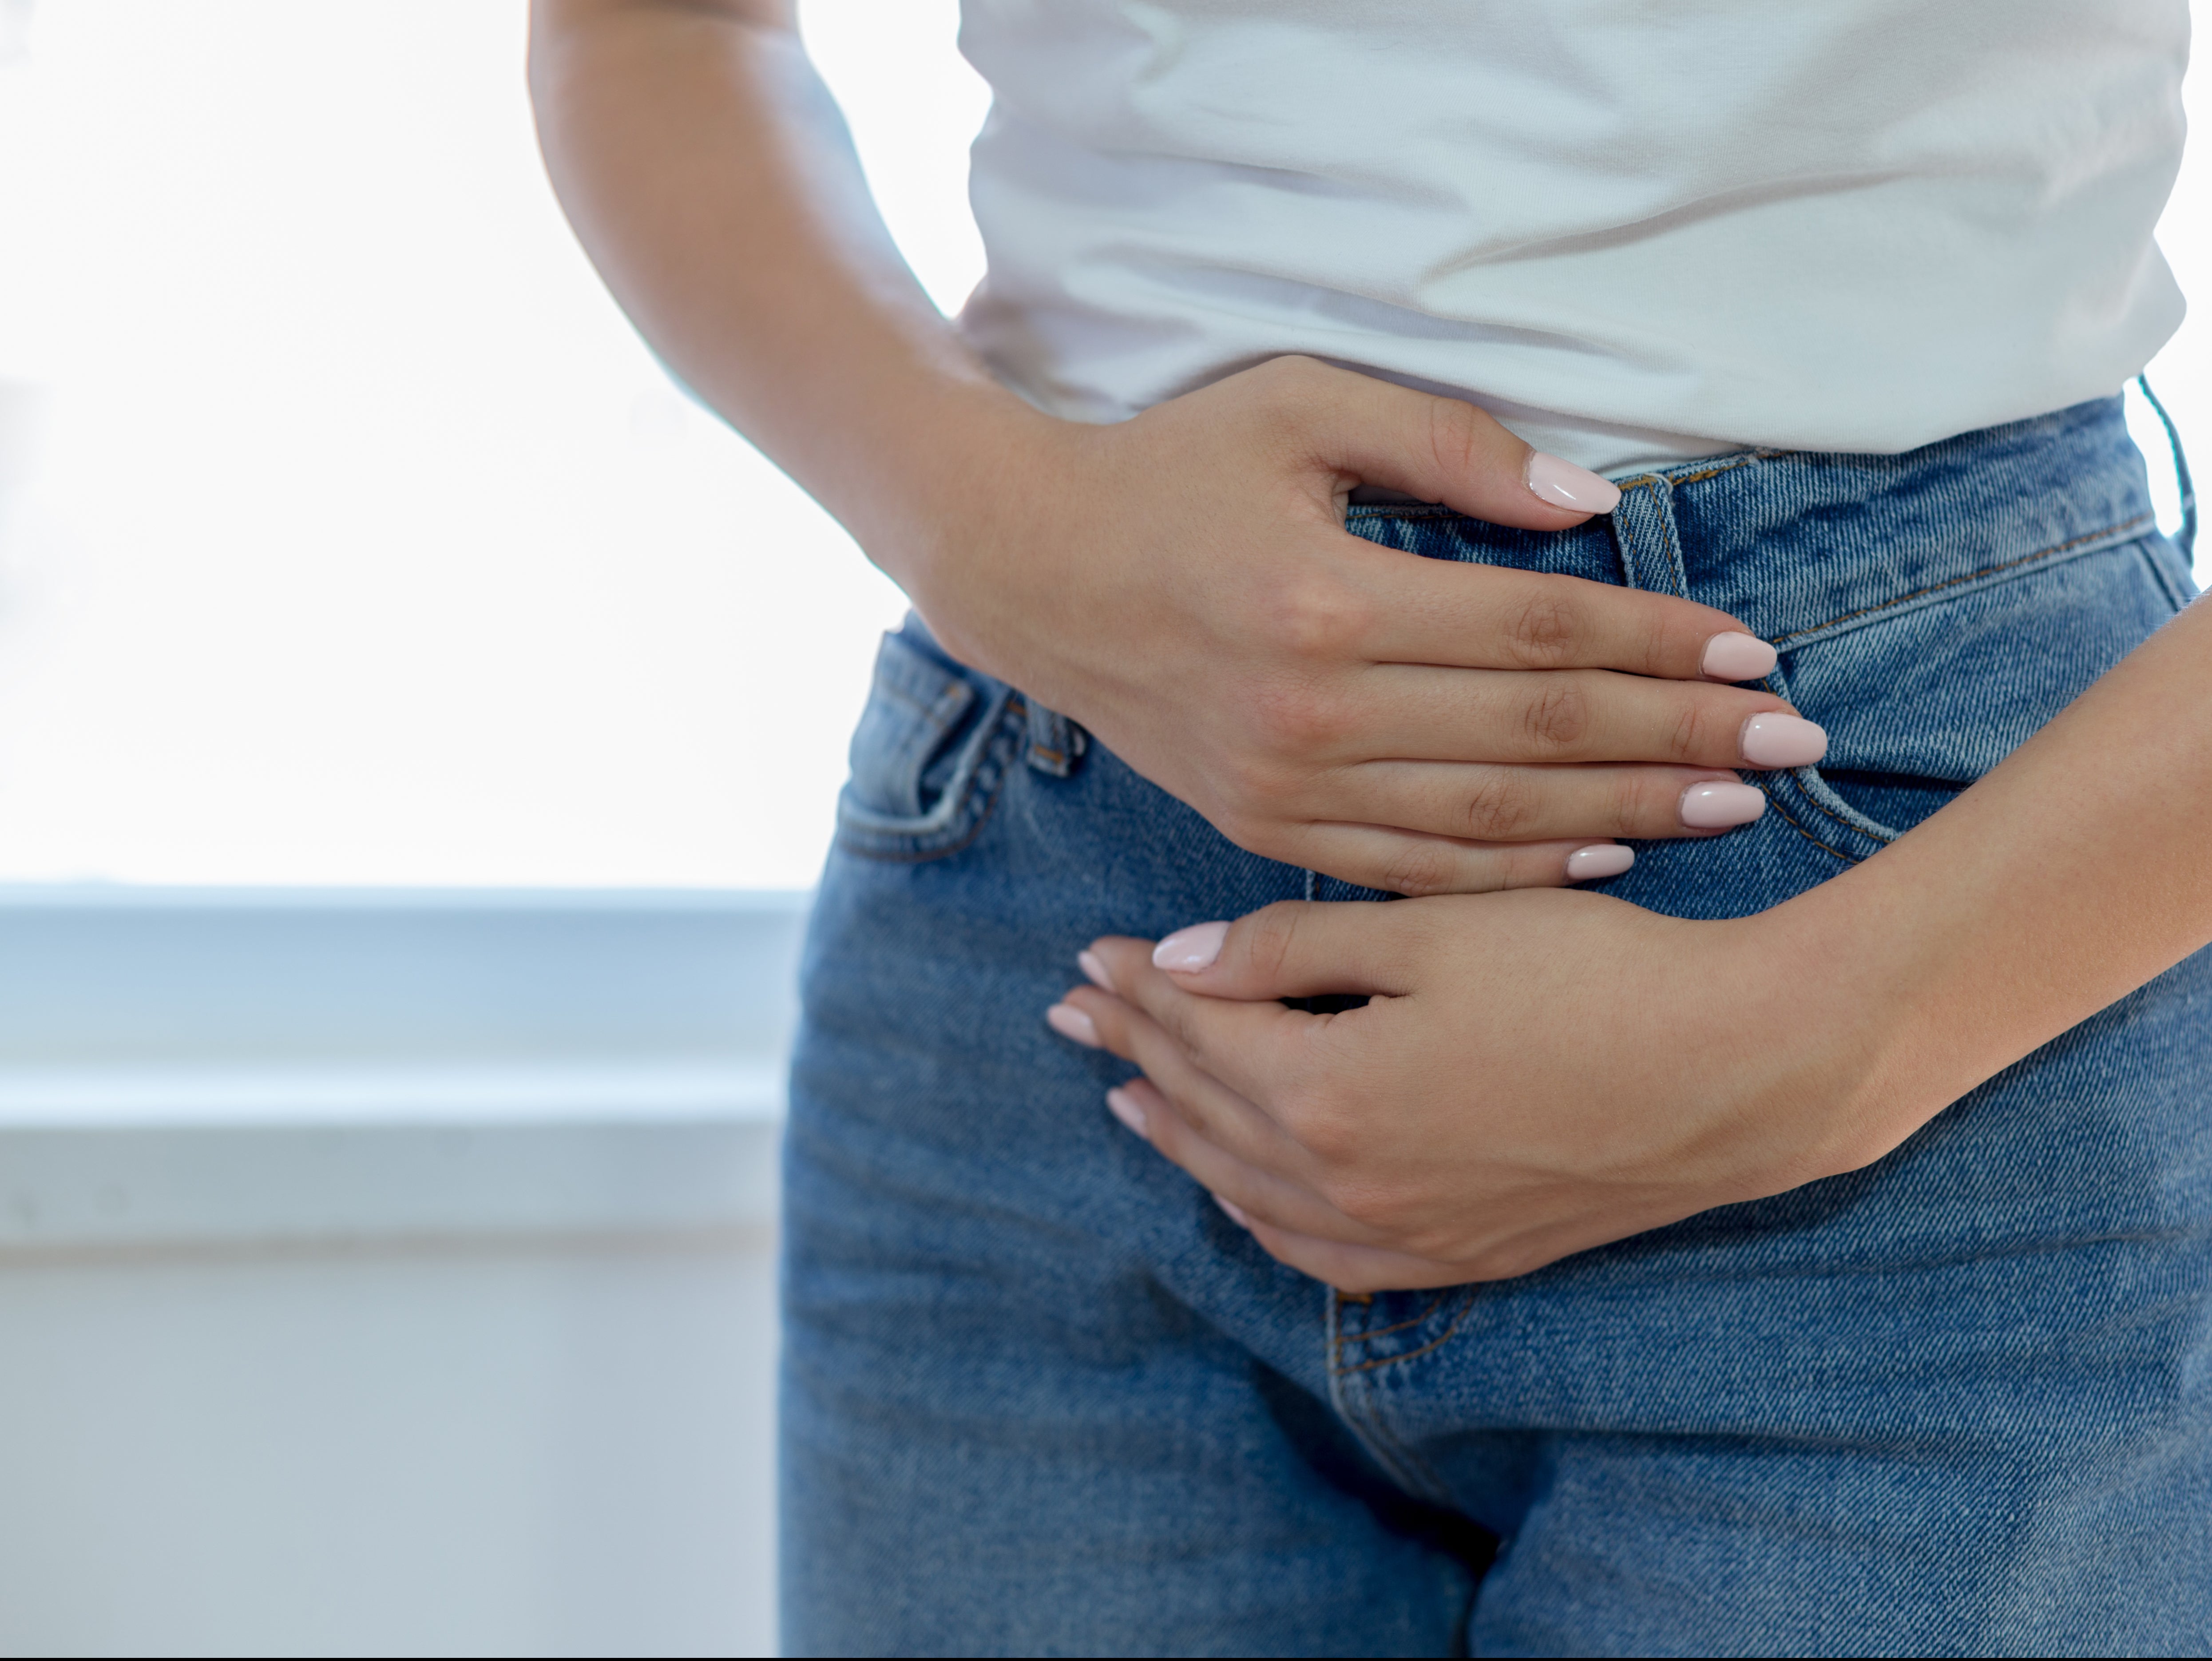 Most women do not know that bloating is a key symptom of ovarian cancer